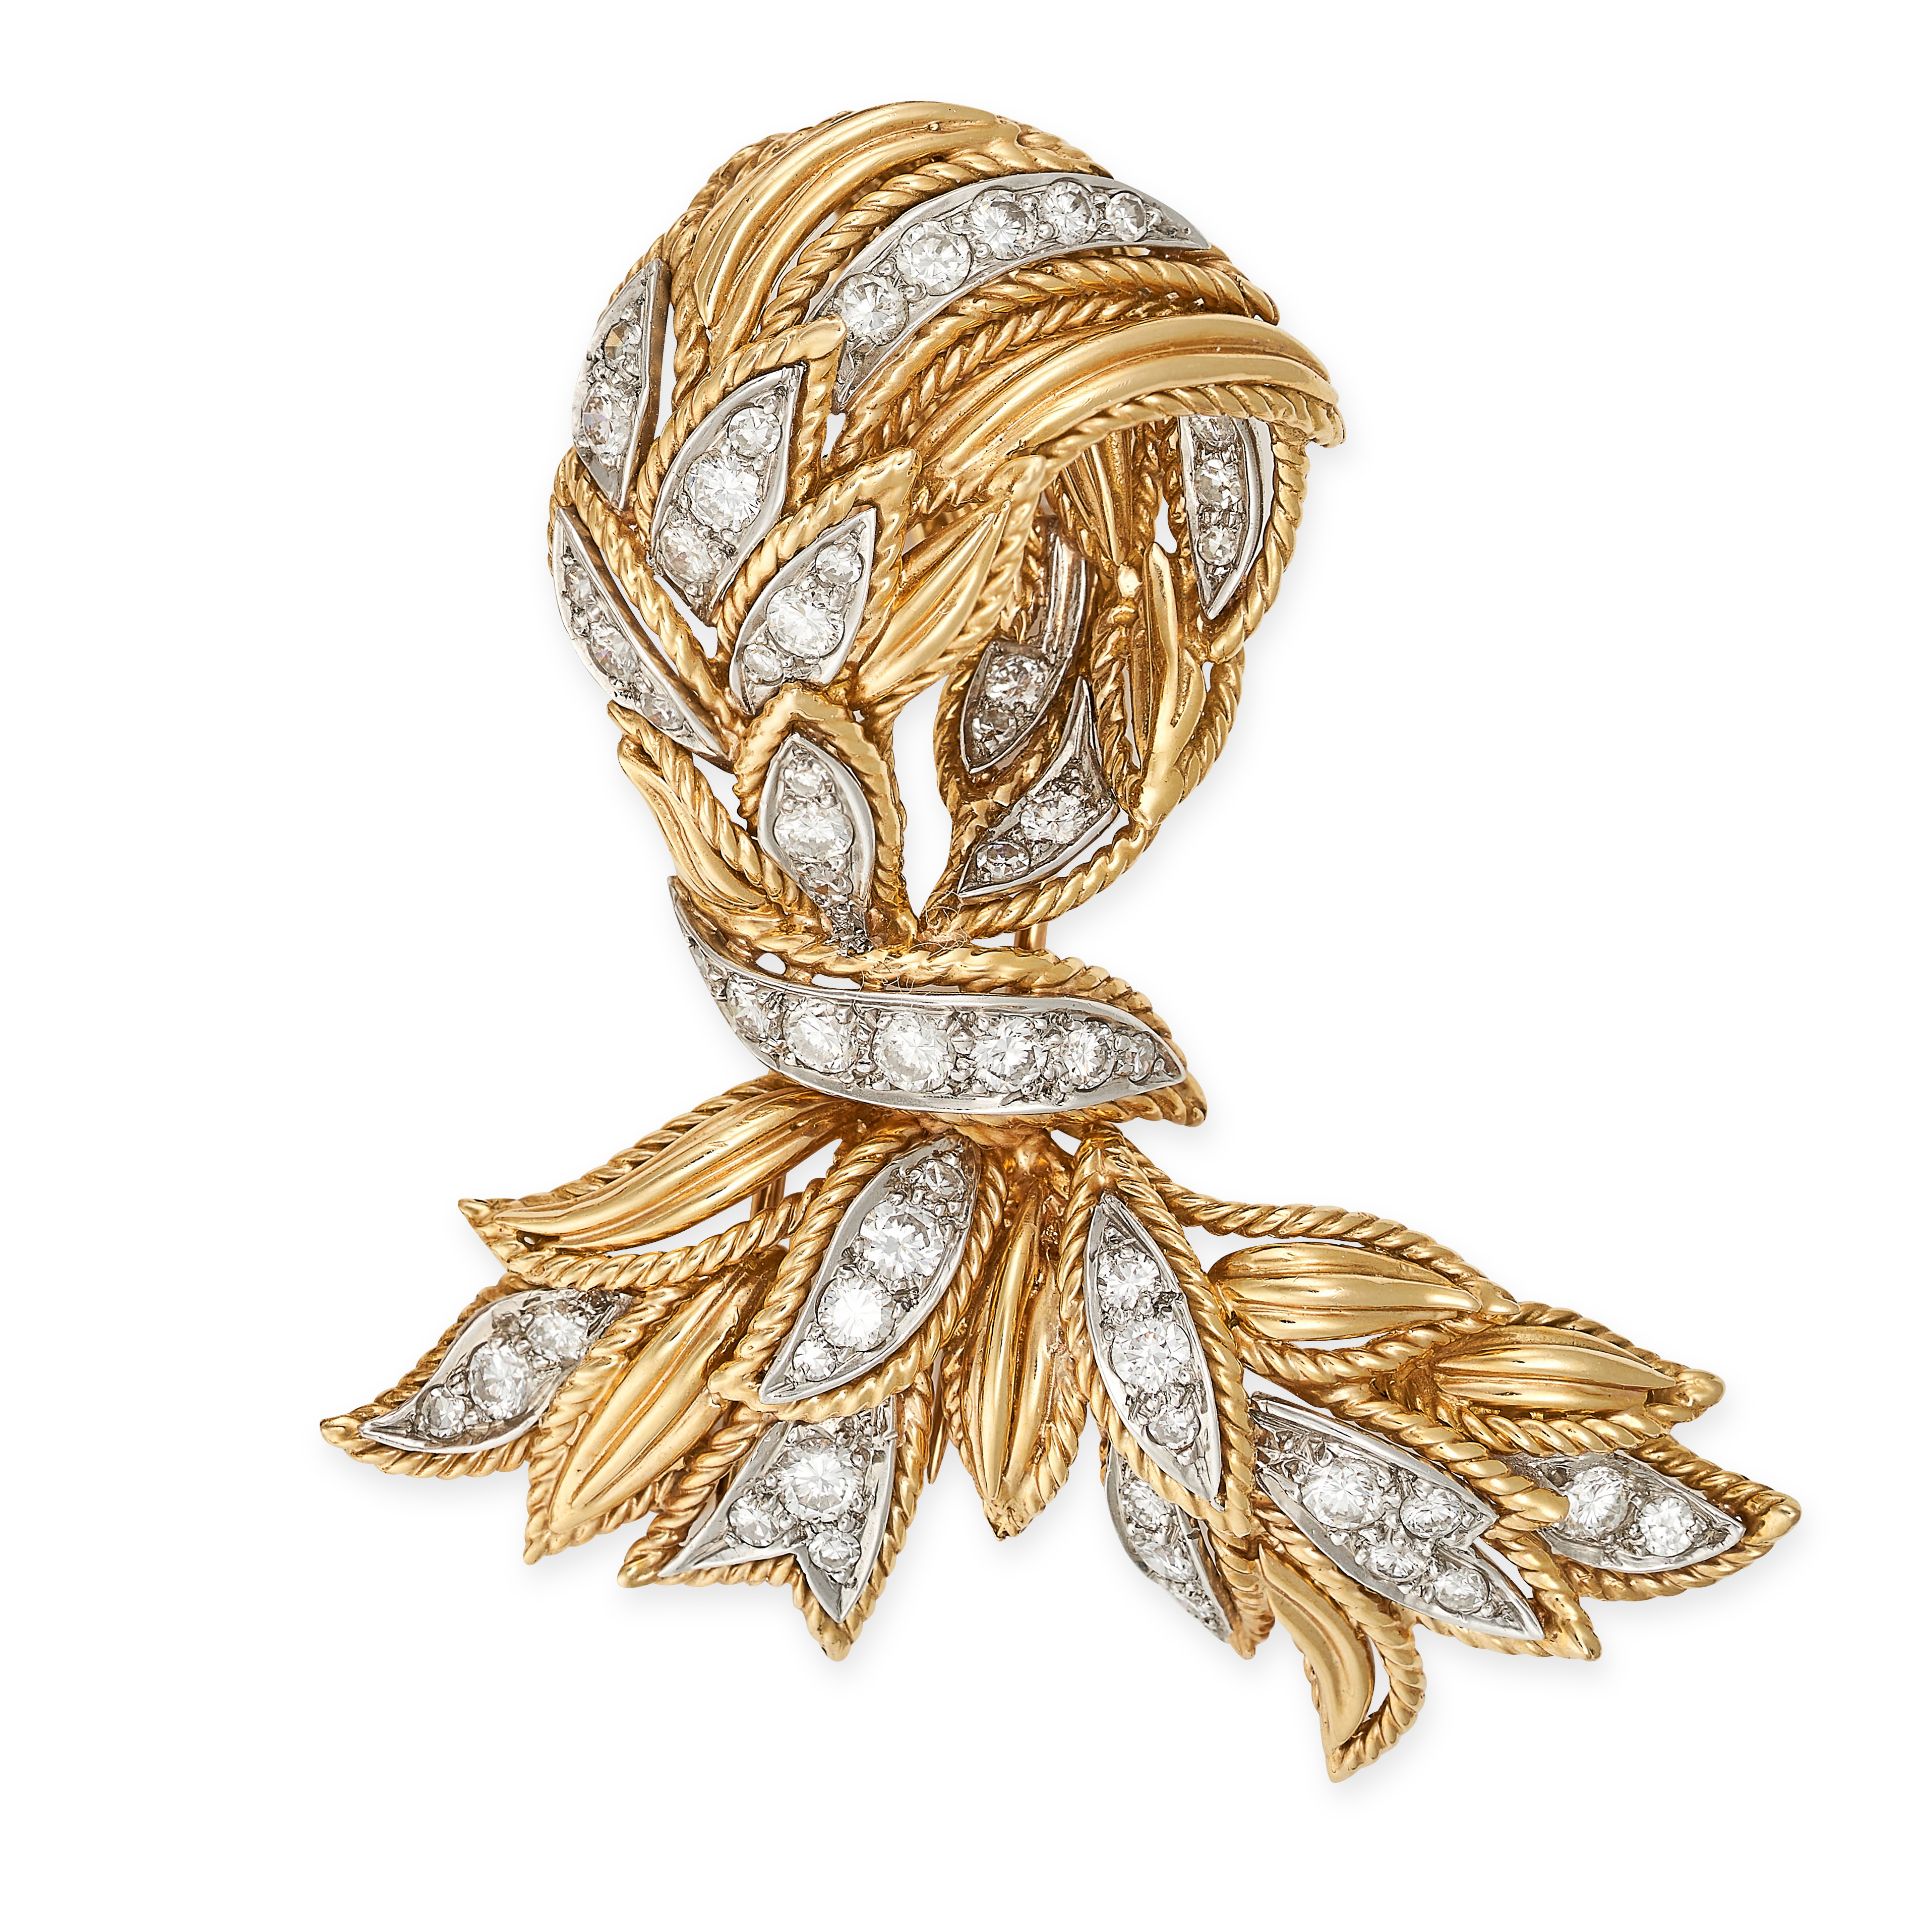 VAN CLEEF & ARPELS, A VINTAGE DIAMOND BROOCH in 18ct yellow gold and platinum, designed as